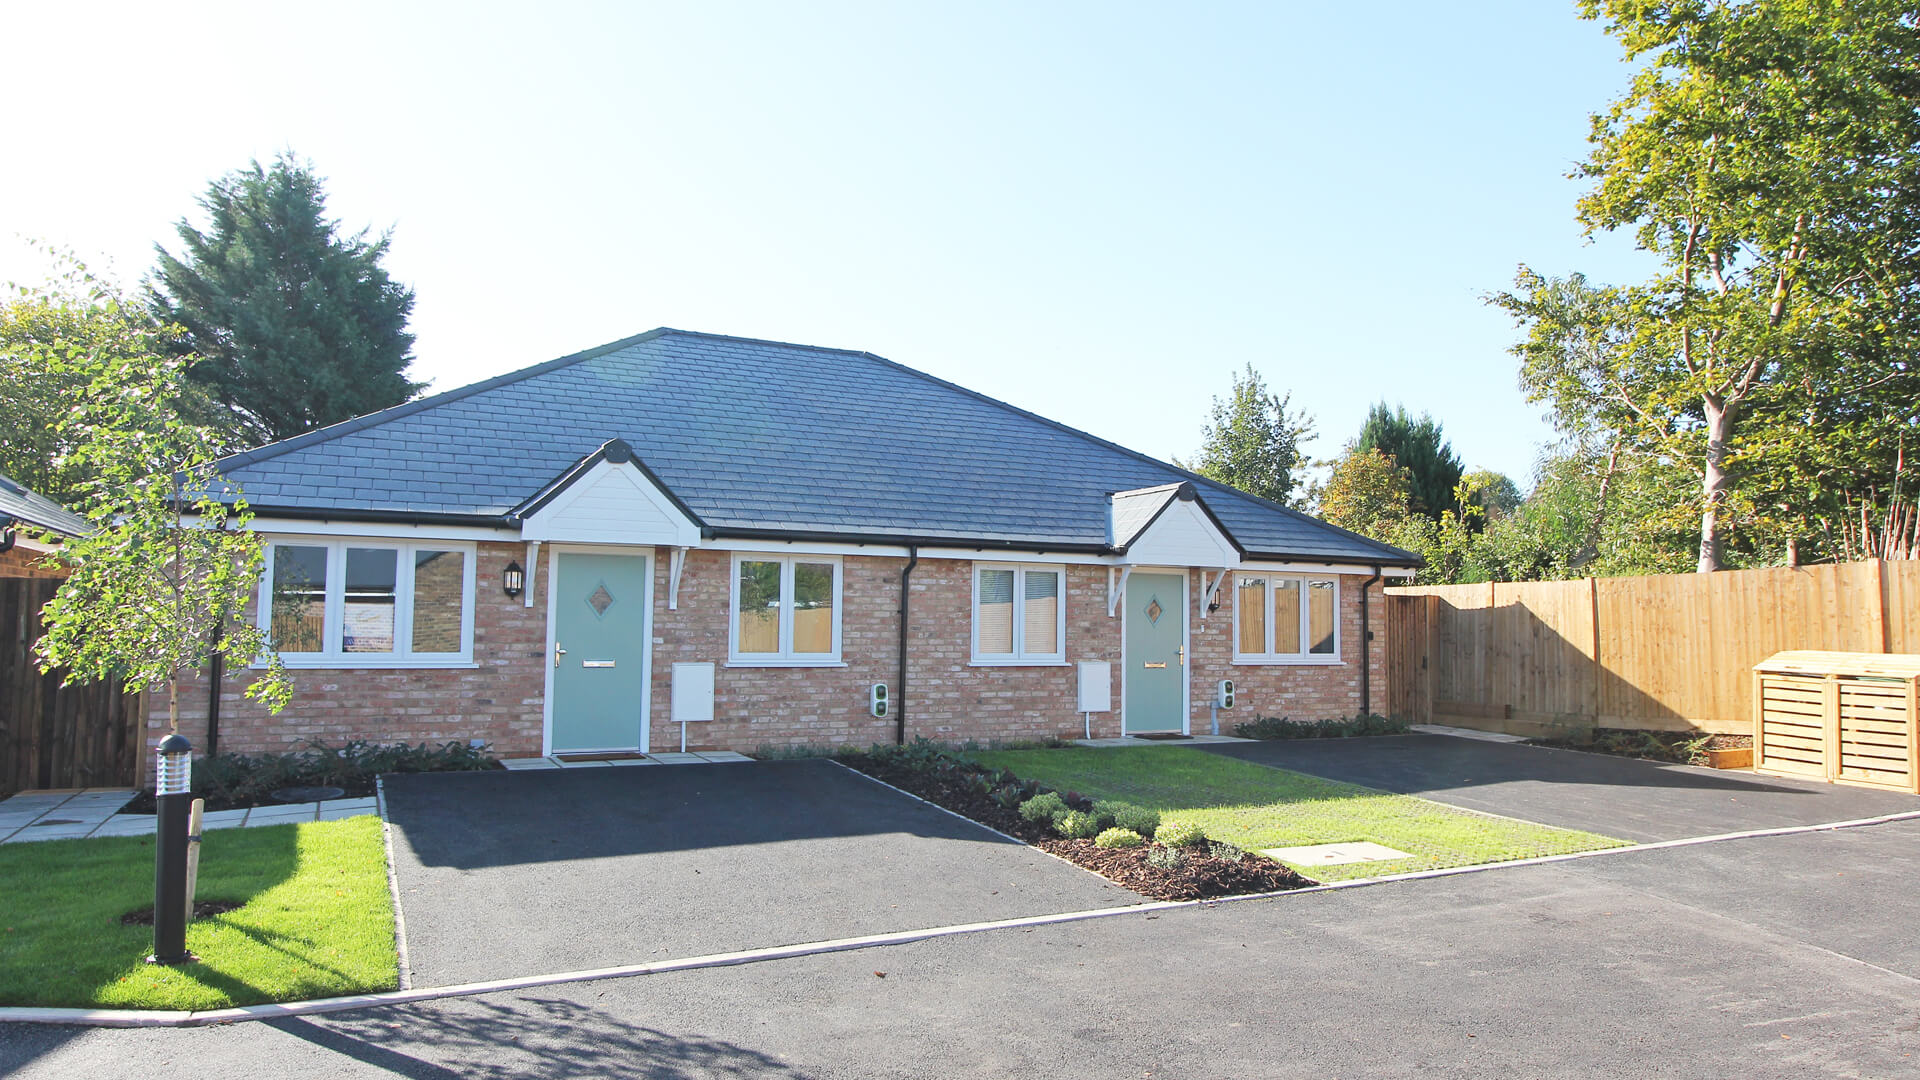 New build Bungalows at our Mulberry place development.